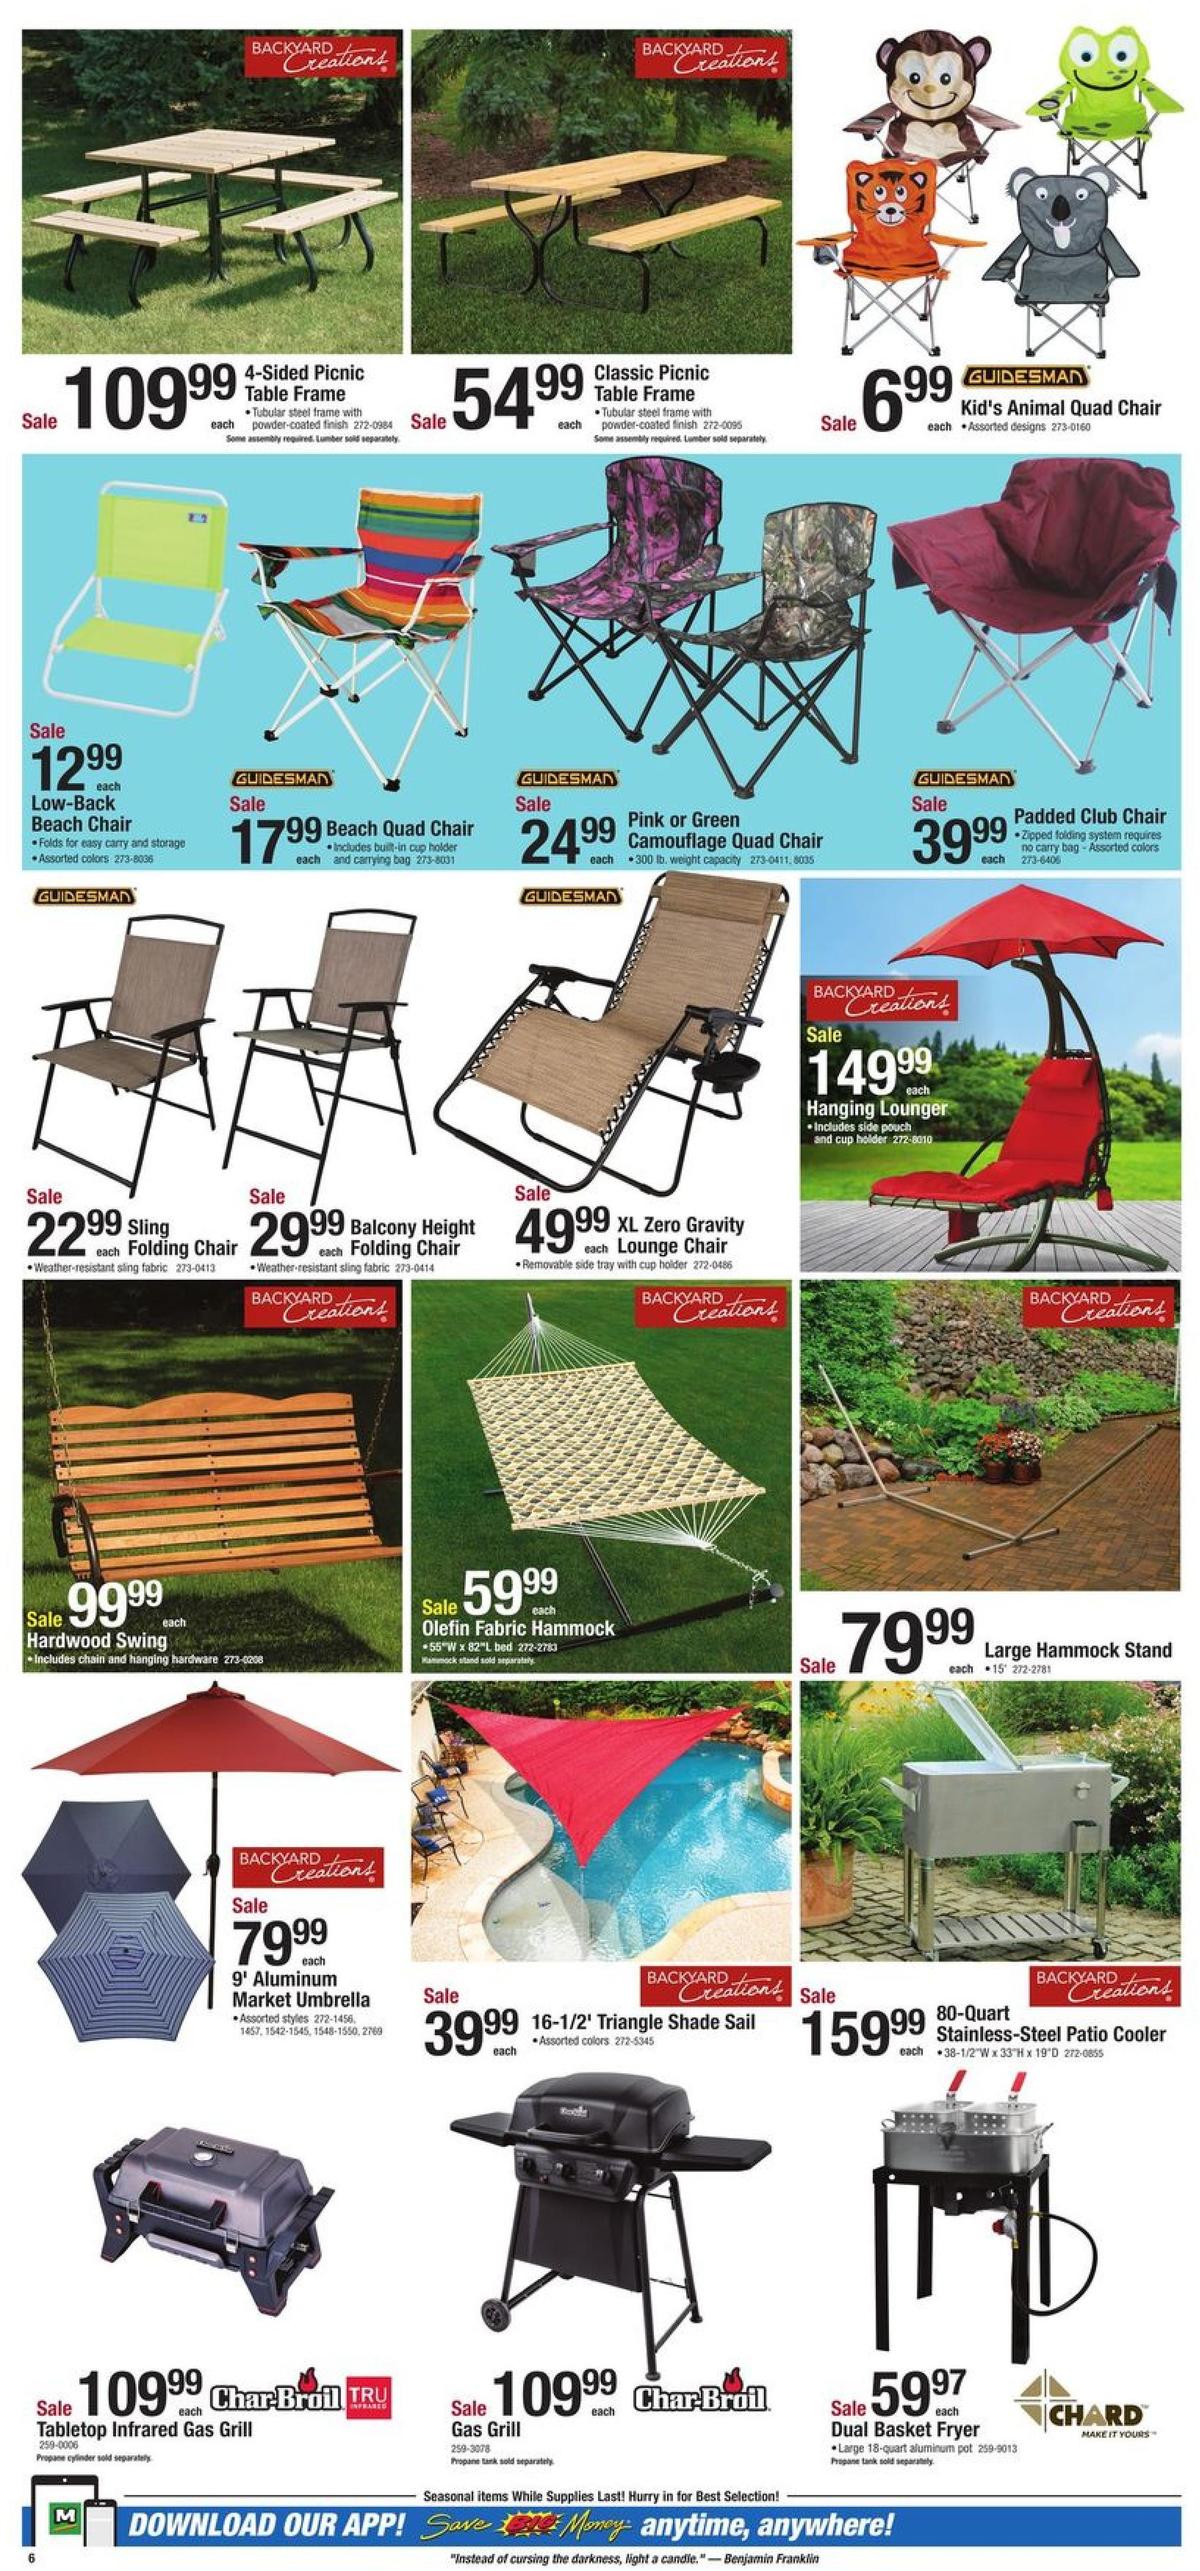 Menards 4th of July Sale Outdoor Gear Weekly Ads & Special Buys from